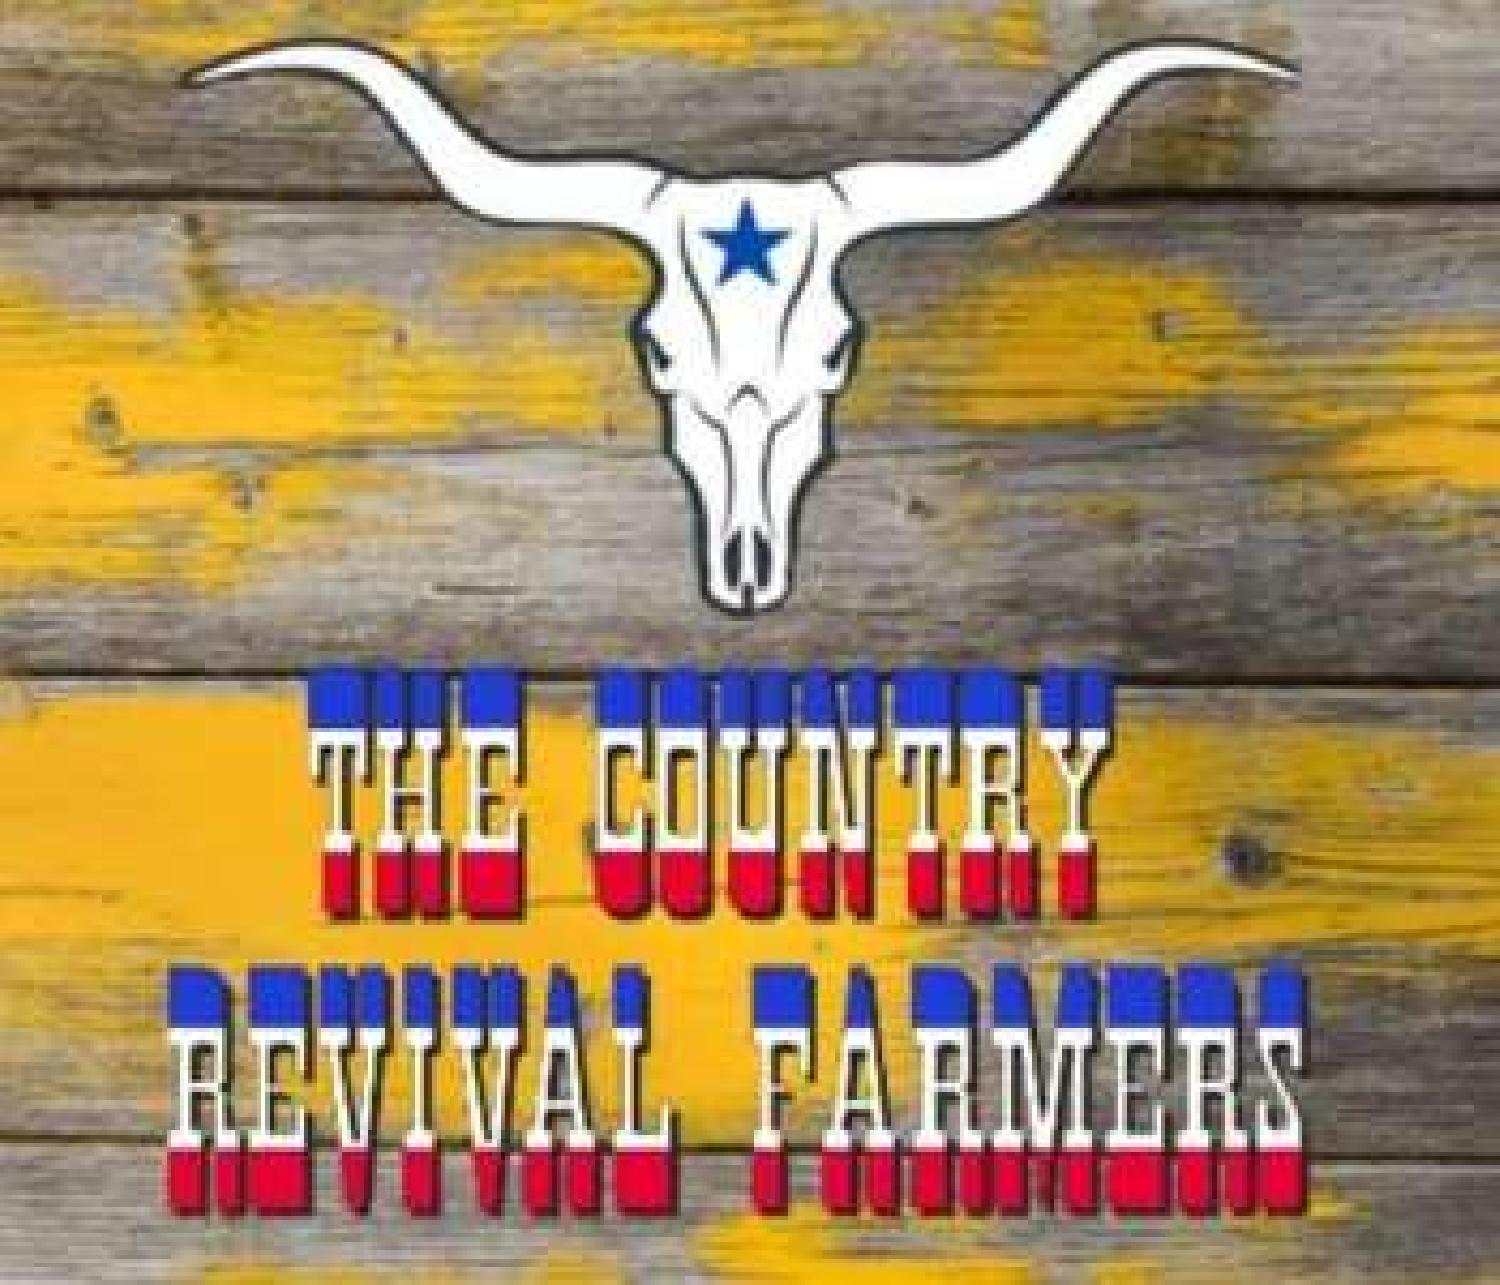 The Country Revival Farmers 